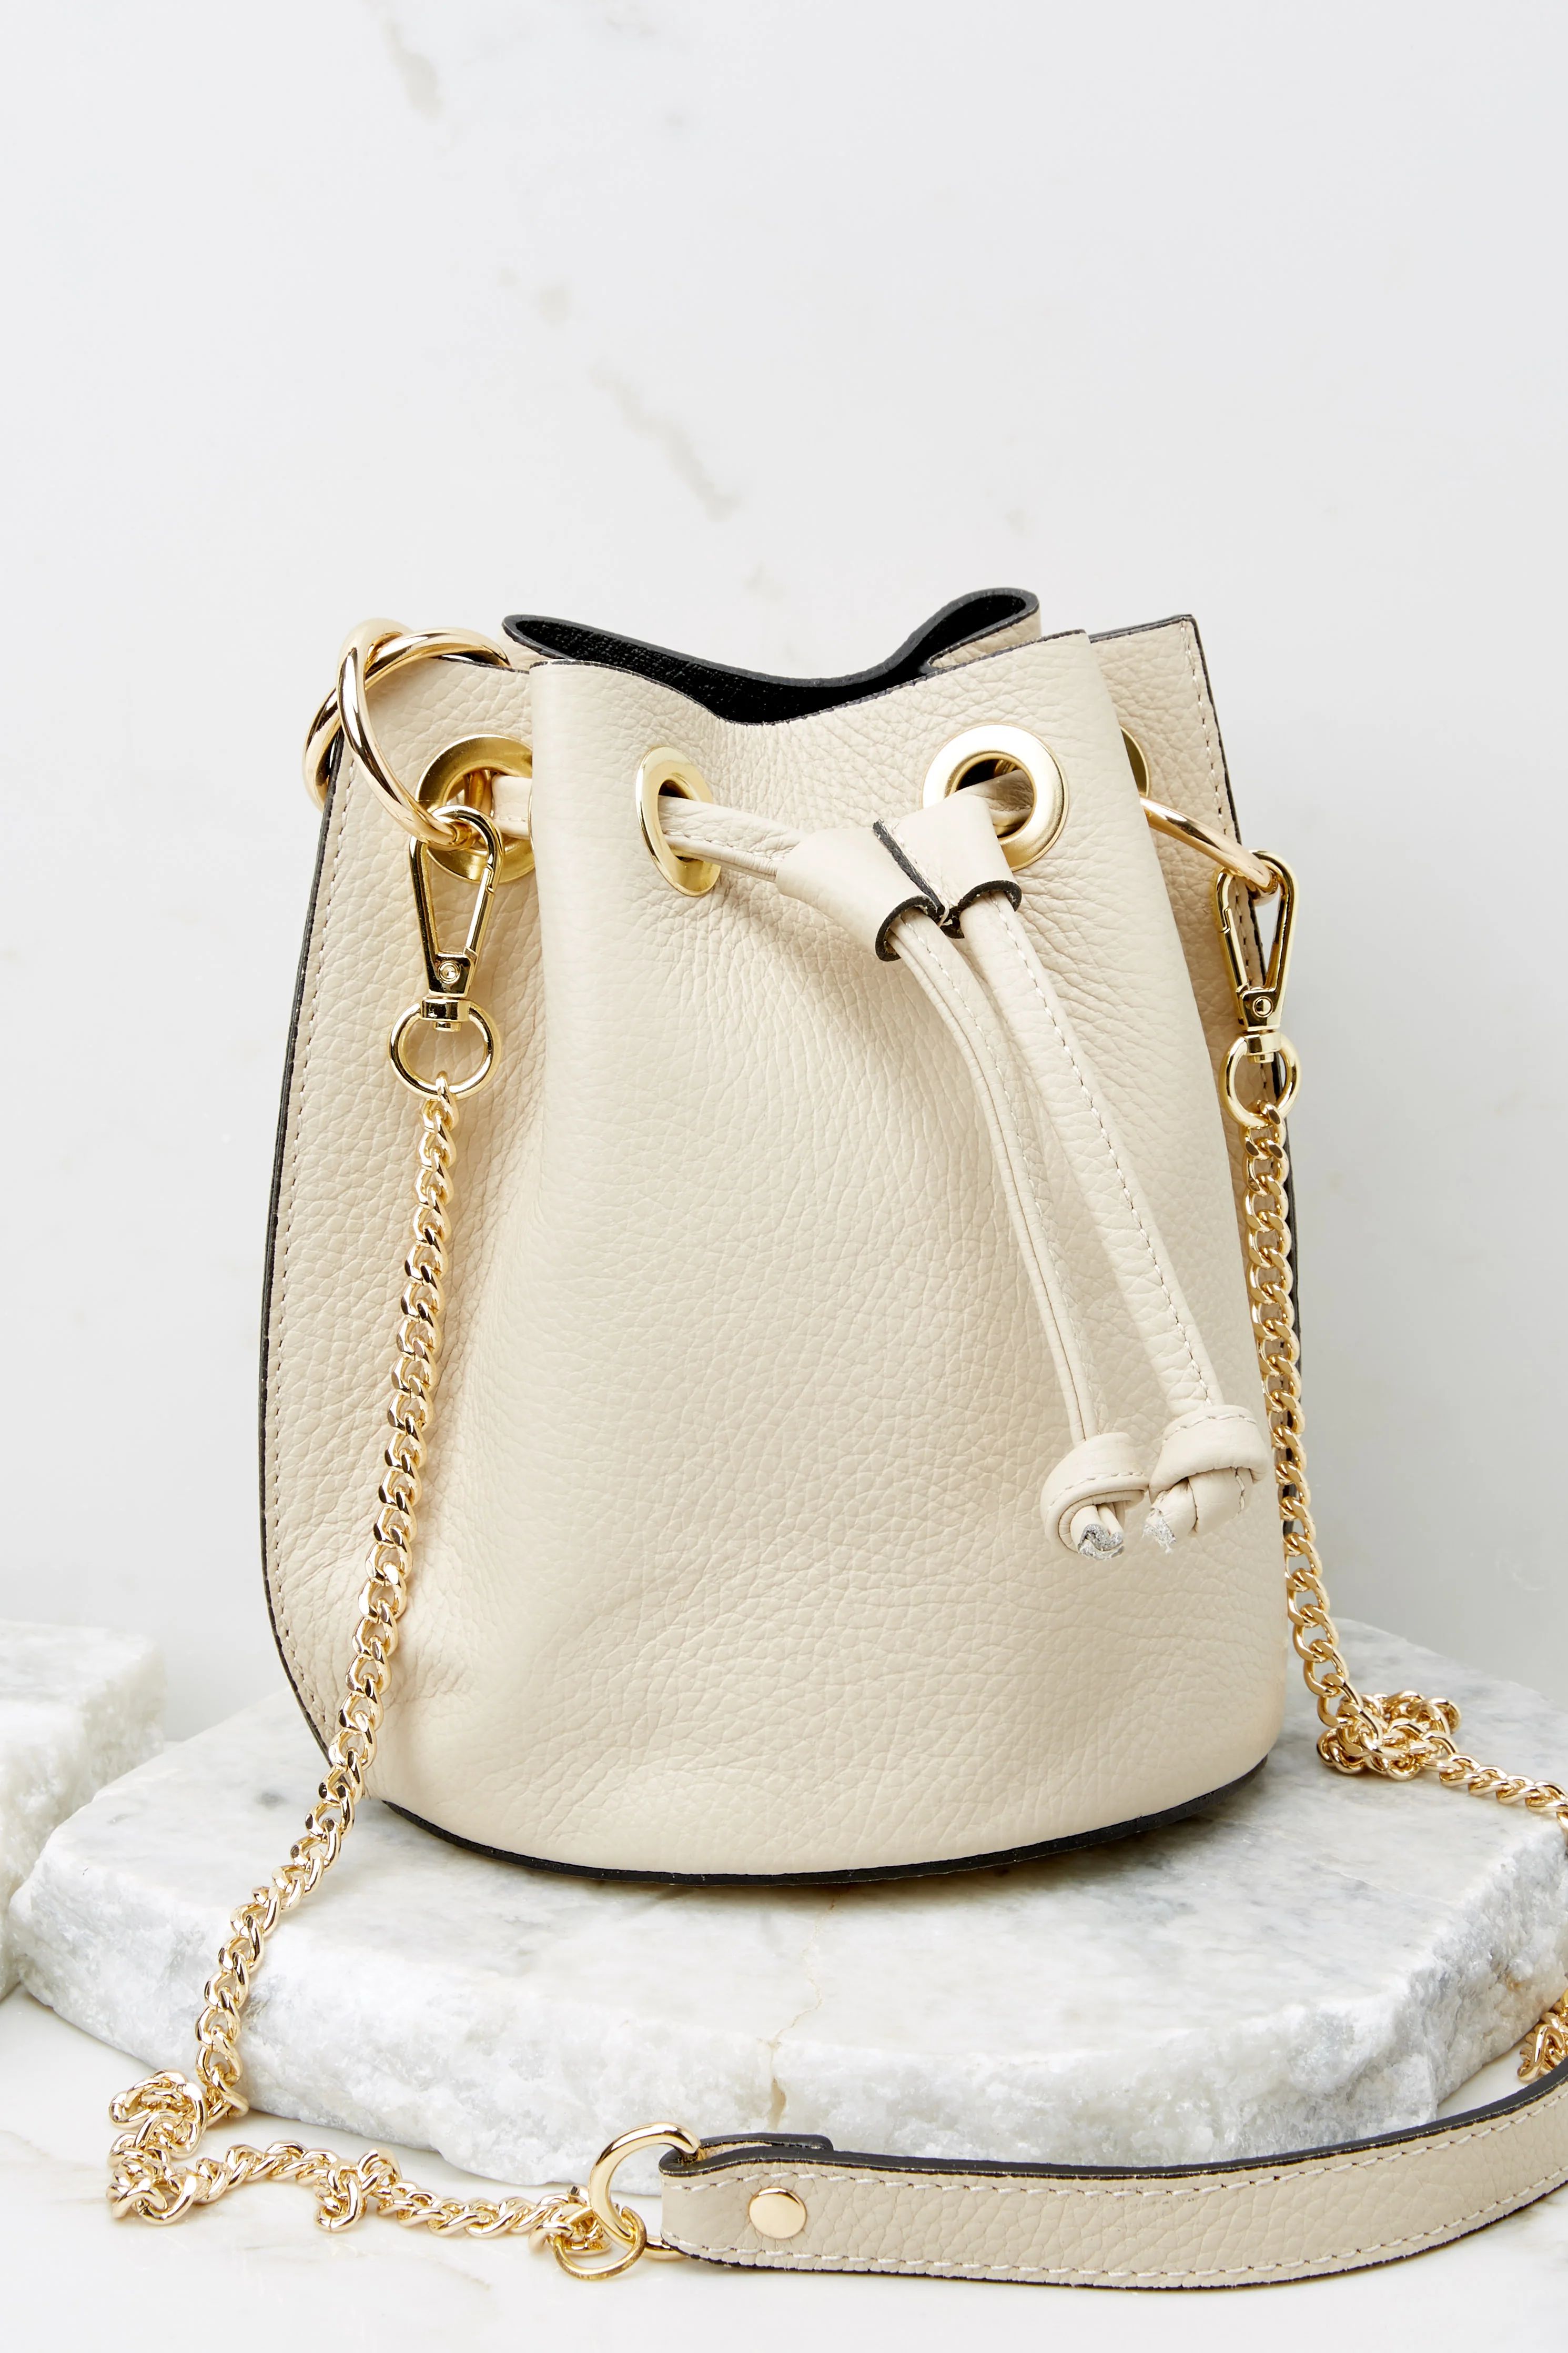 Drawn To You Cream Leather Bag | Red Dress 